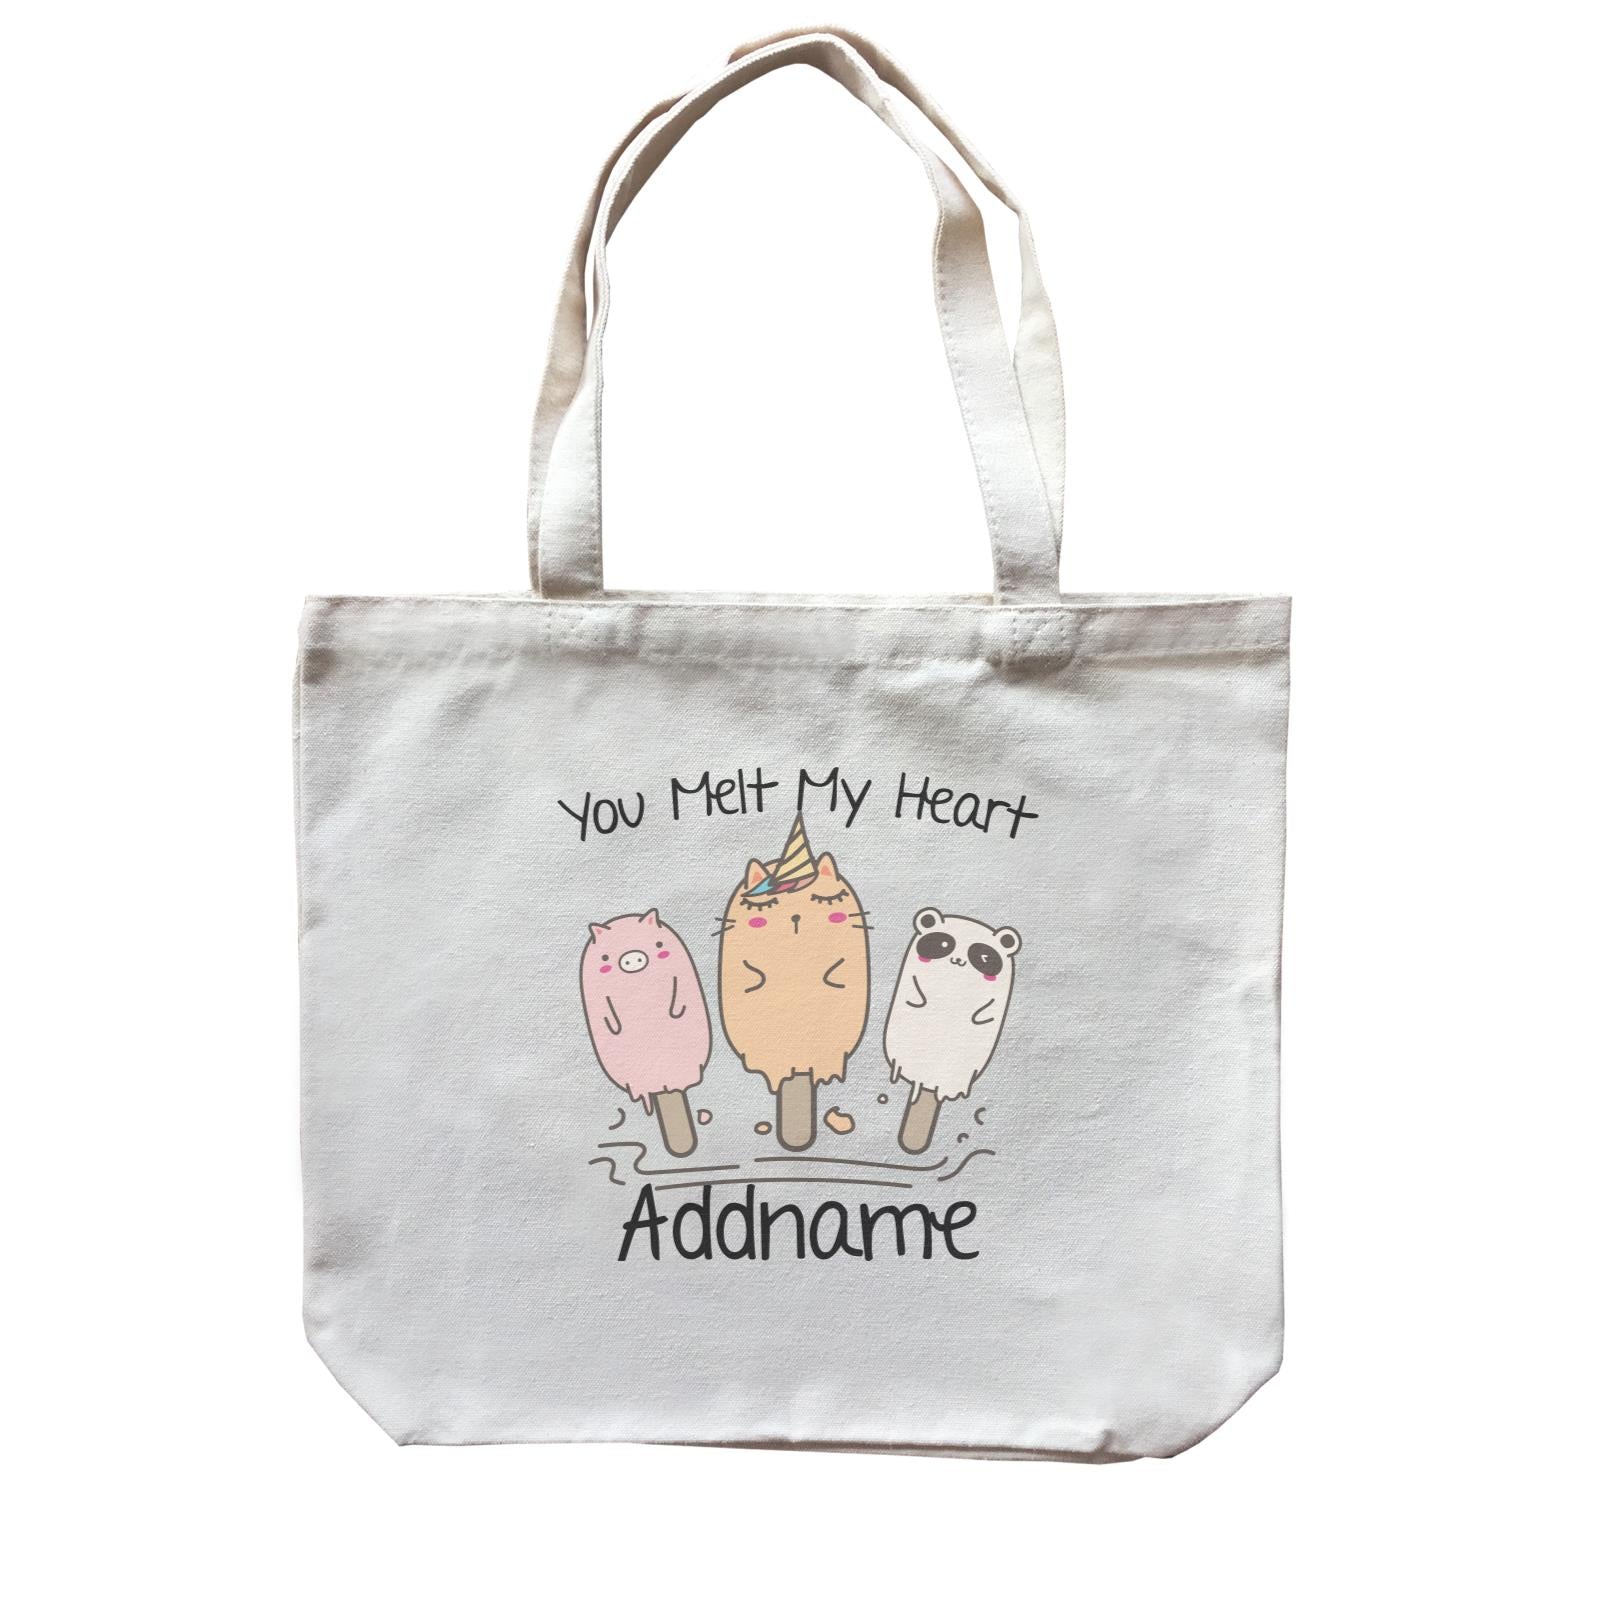 Cute Animals And Friends Series You Melt My Heart Animal Addname Canvas Bag